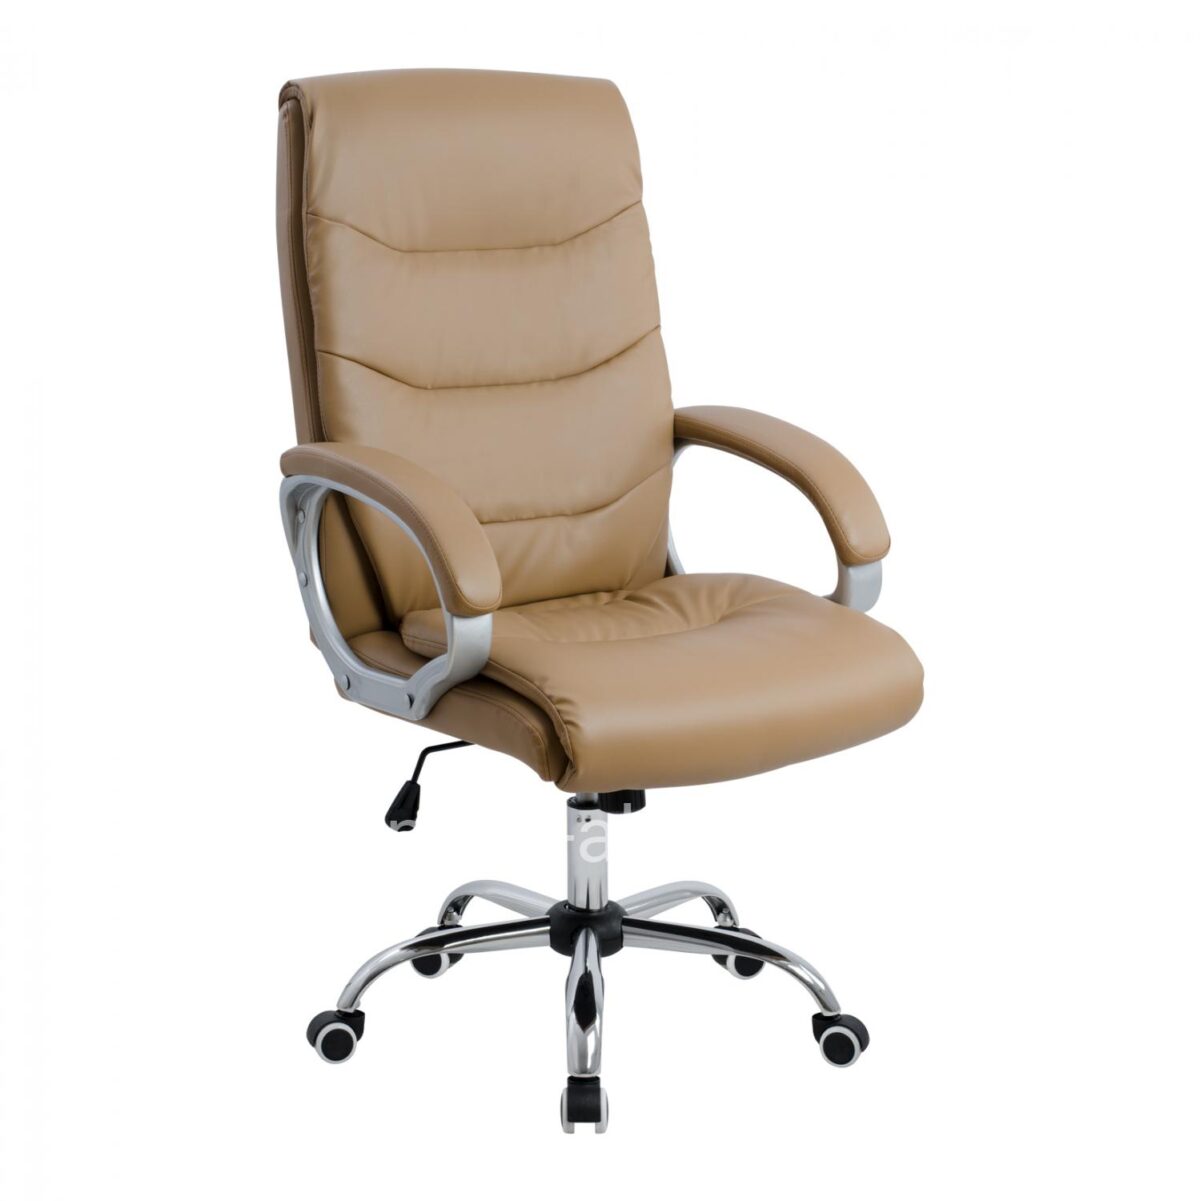 Manager's office chair HM1087.09 Camel color 51x71x123 cm